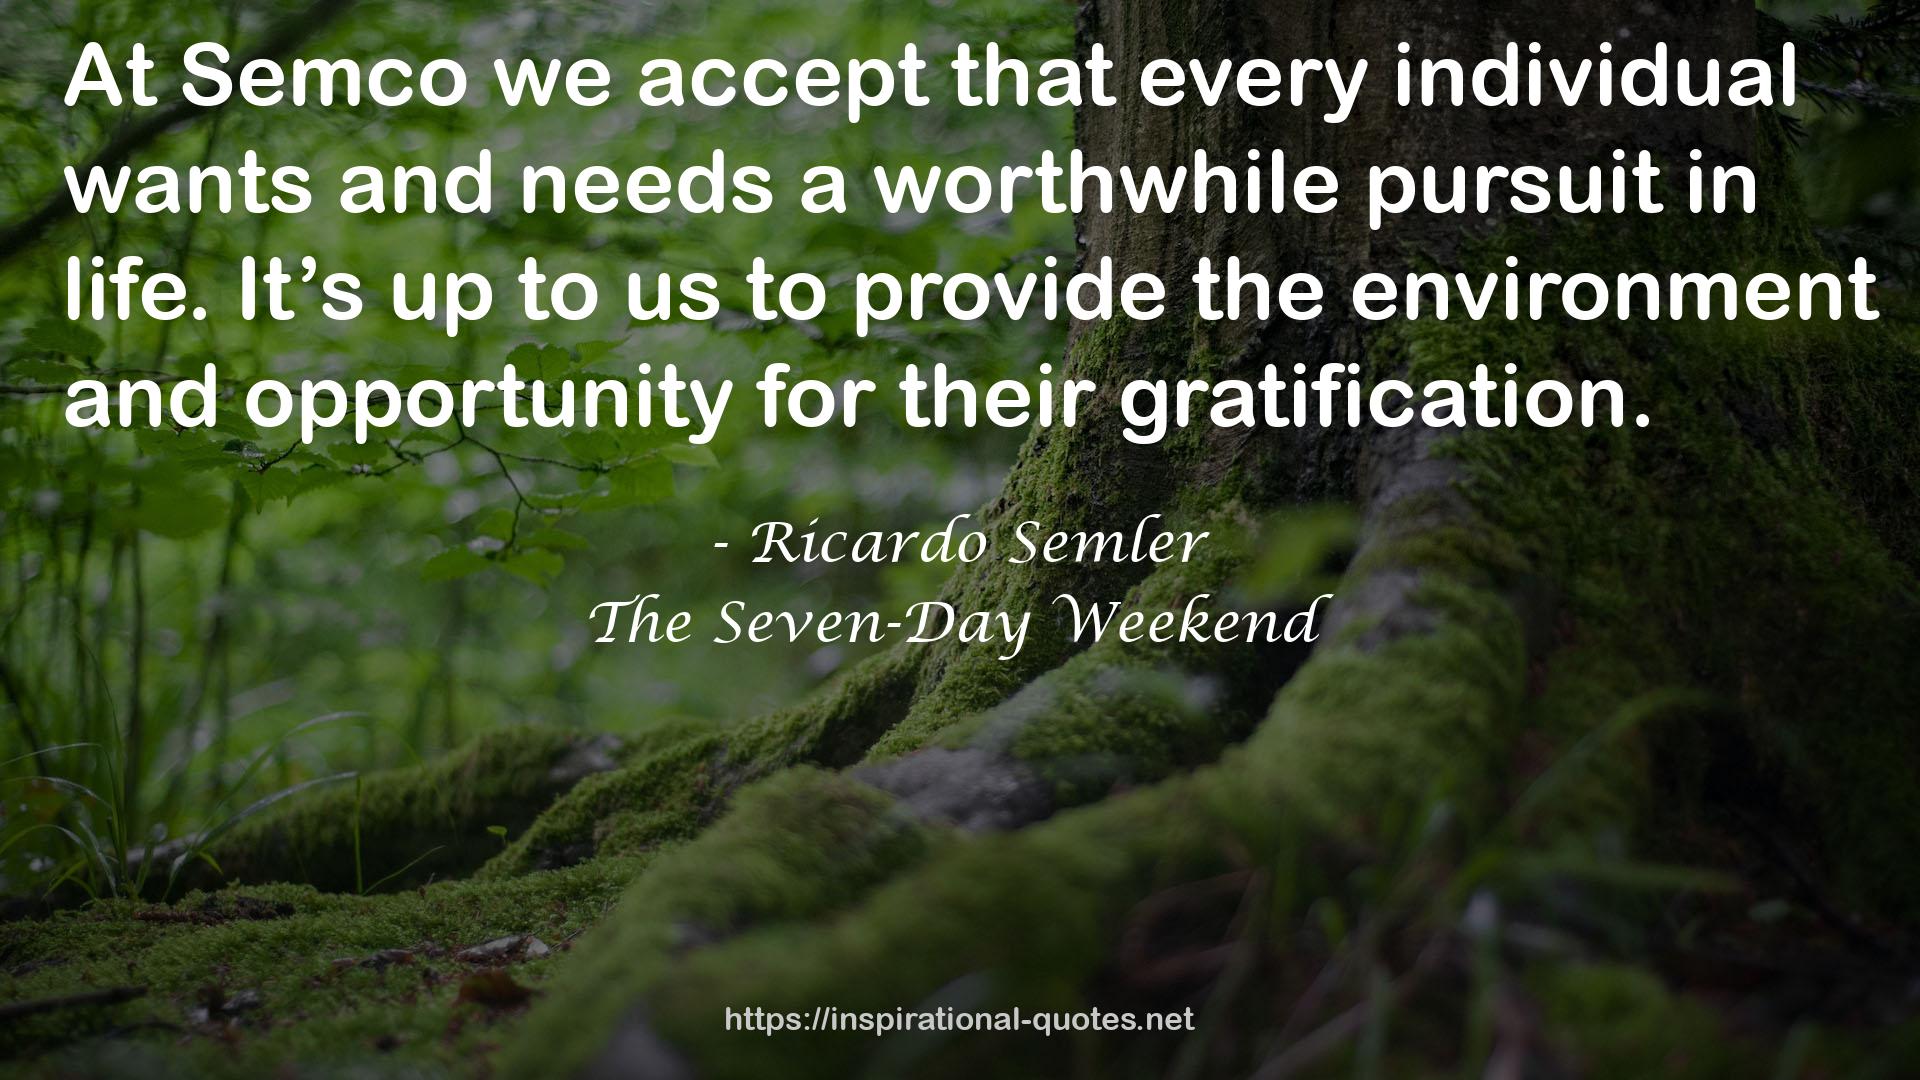 The Seven-Day Weekend QUOTES